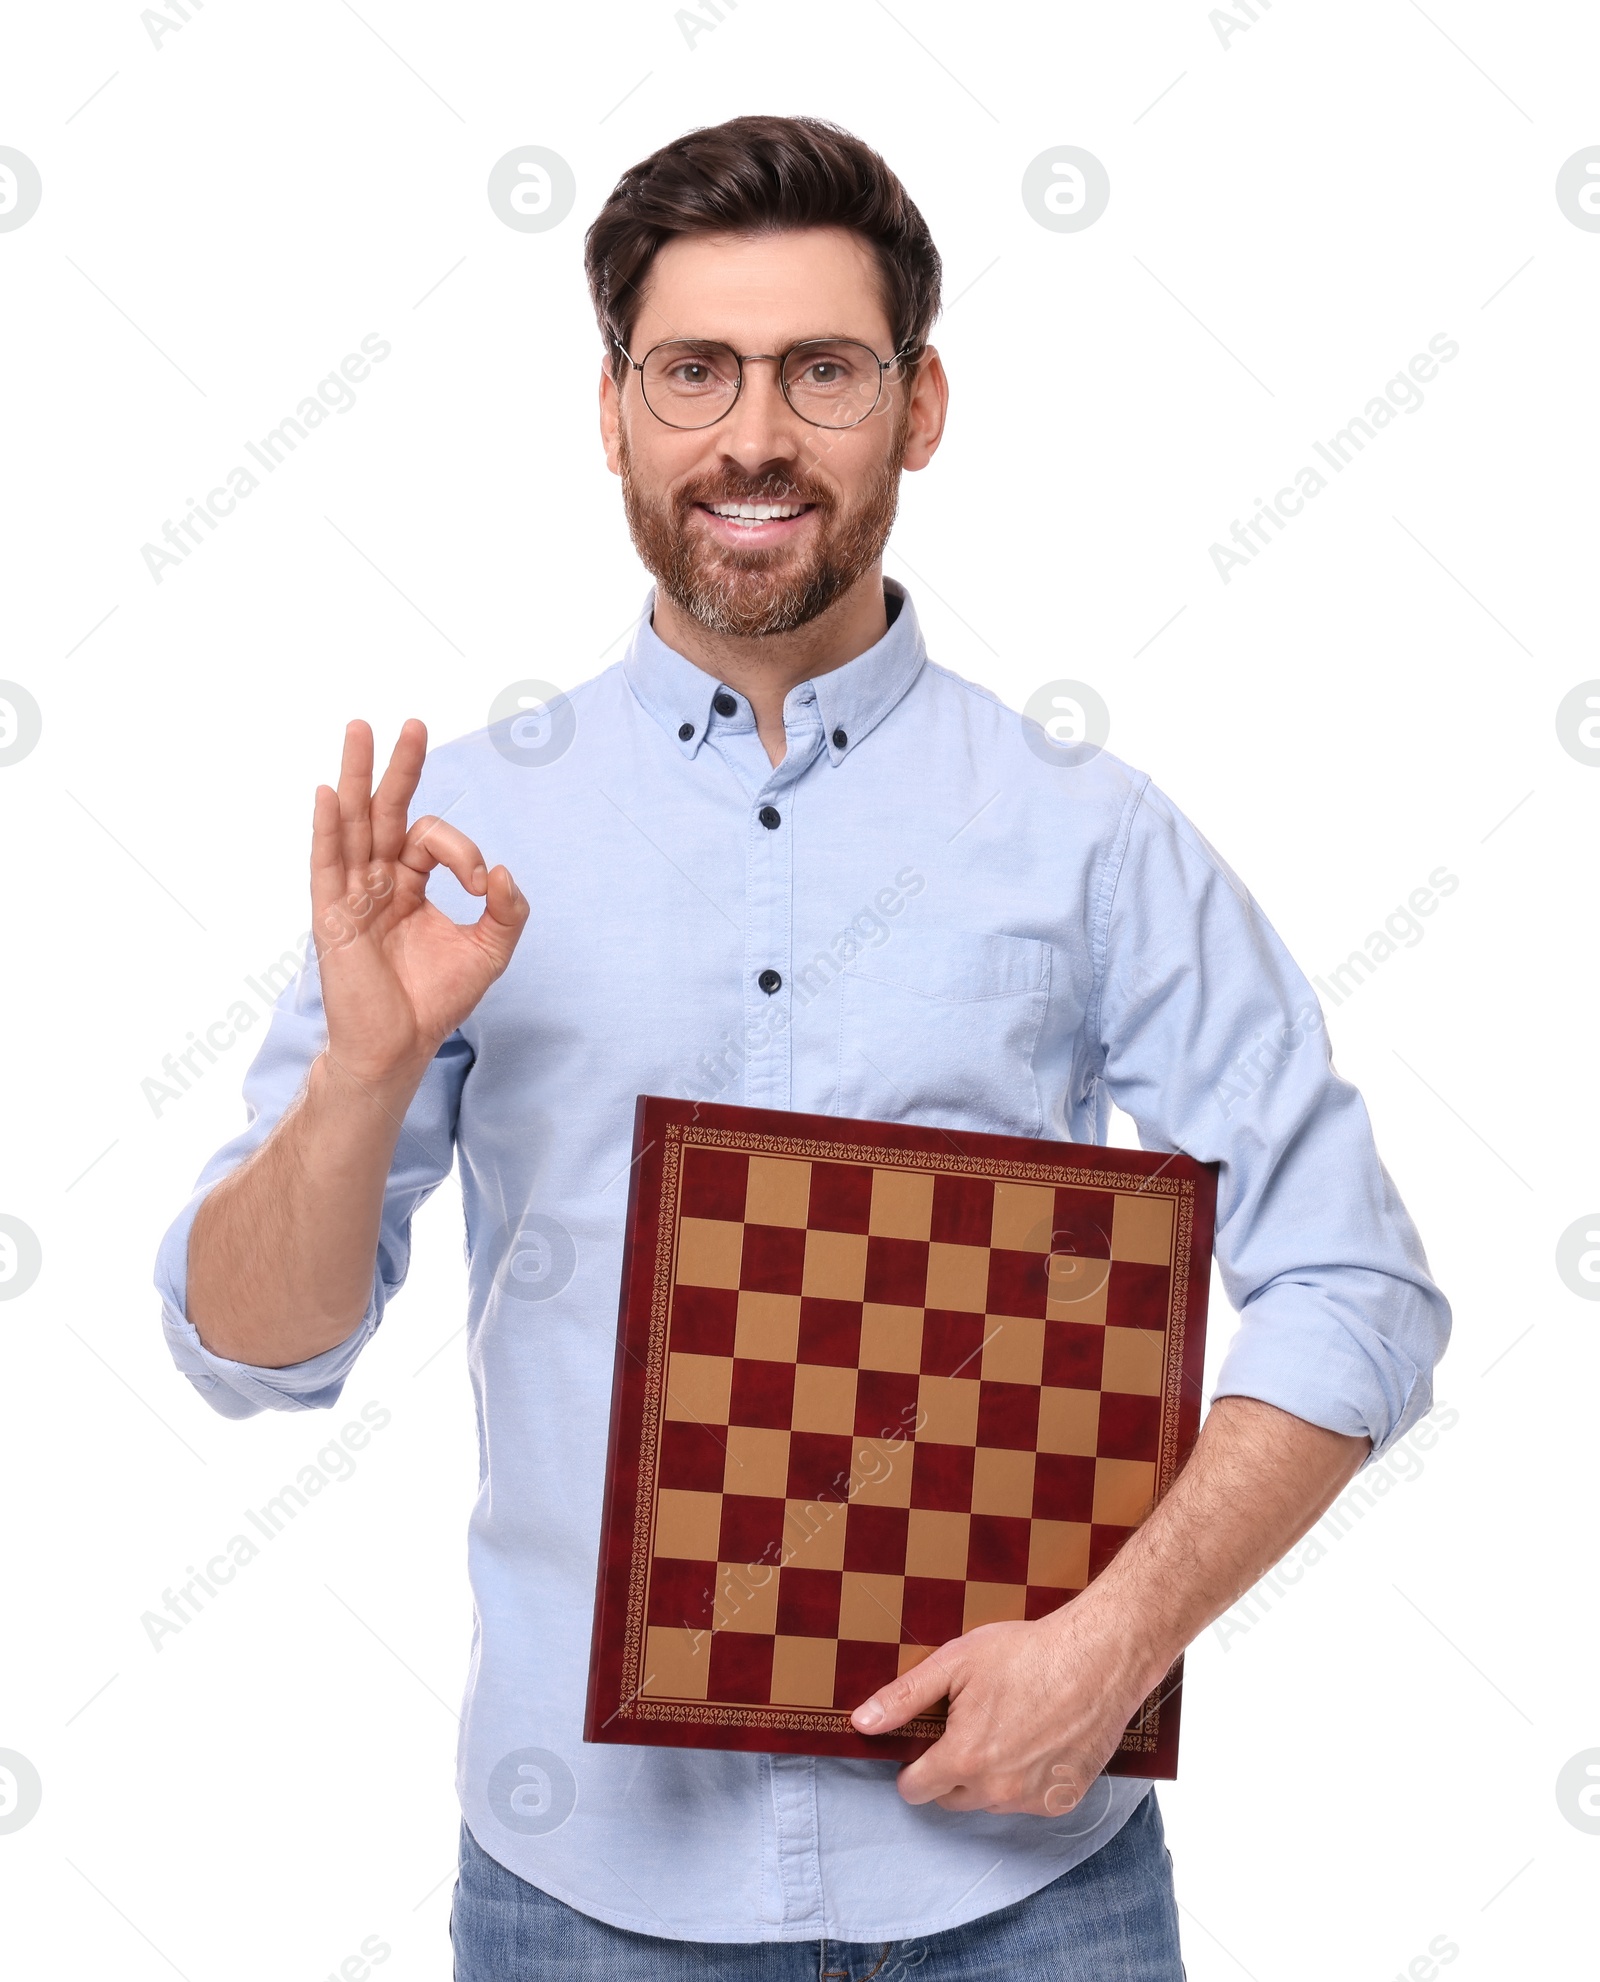 Photo of Smiling man holding chessboard and showing OK gesture on white background